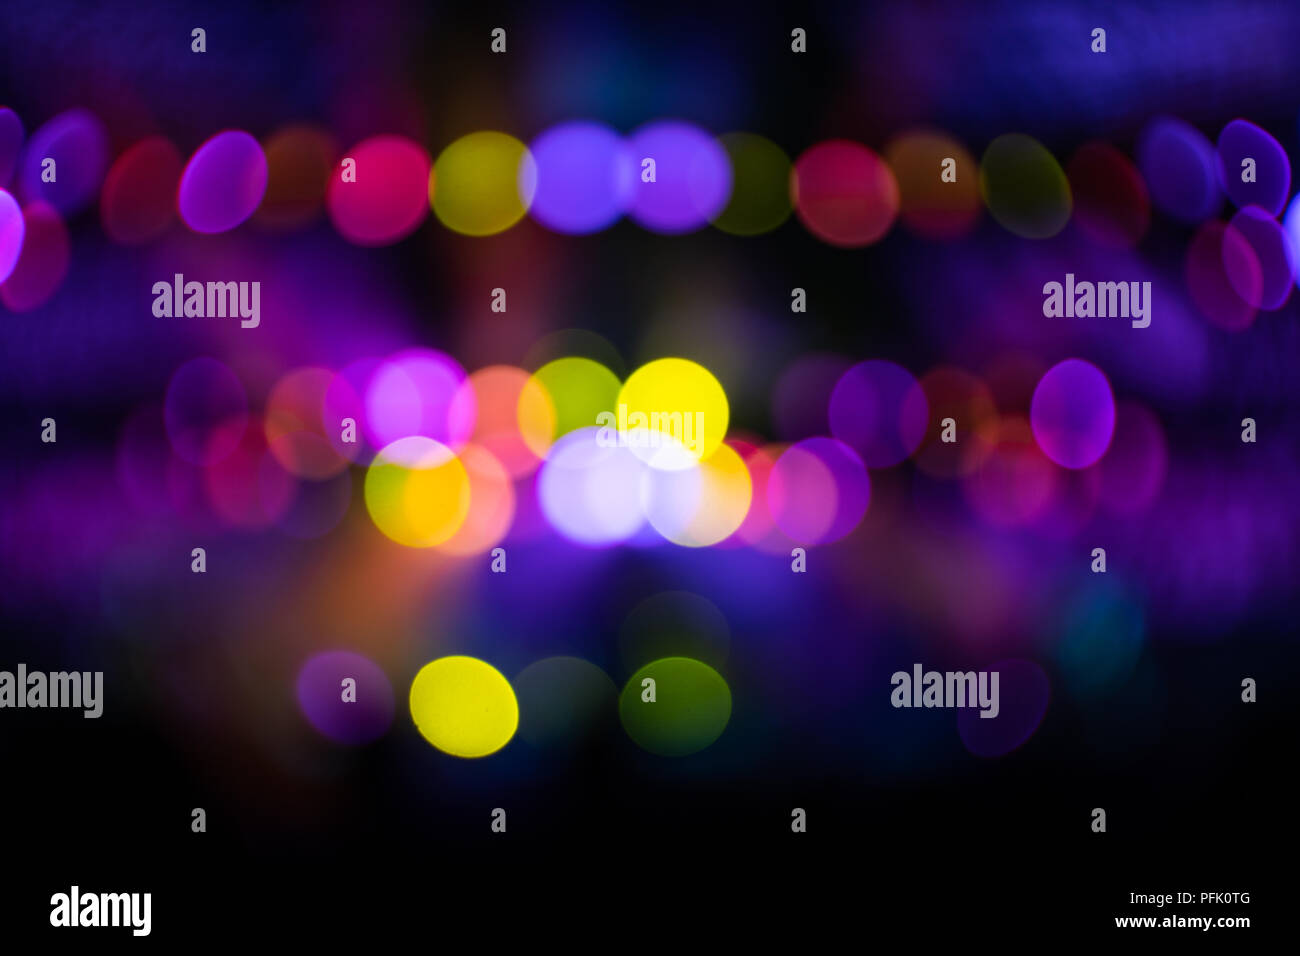 Abstraction with blurry colorful light circles Stock Photo - Alamy